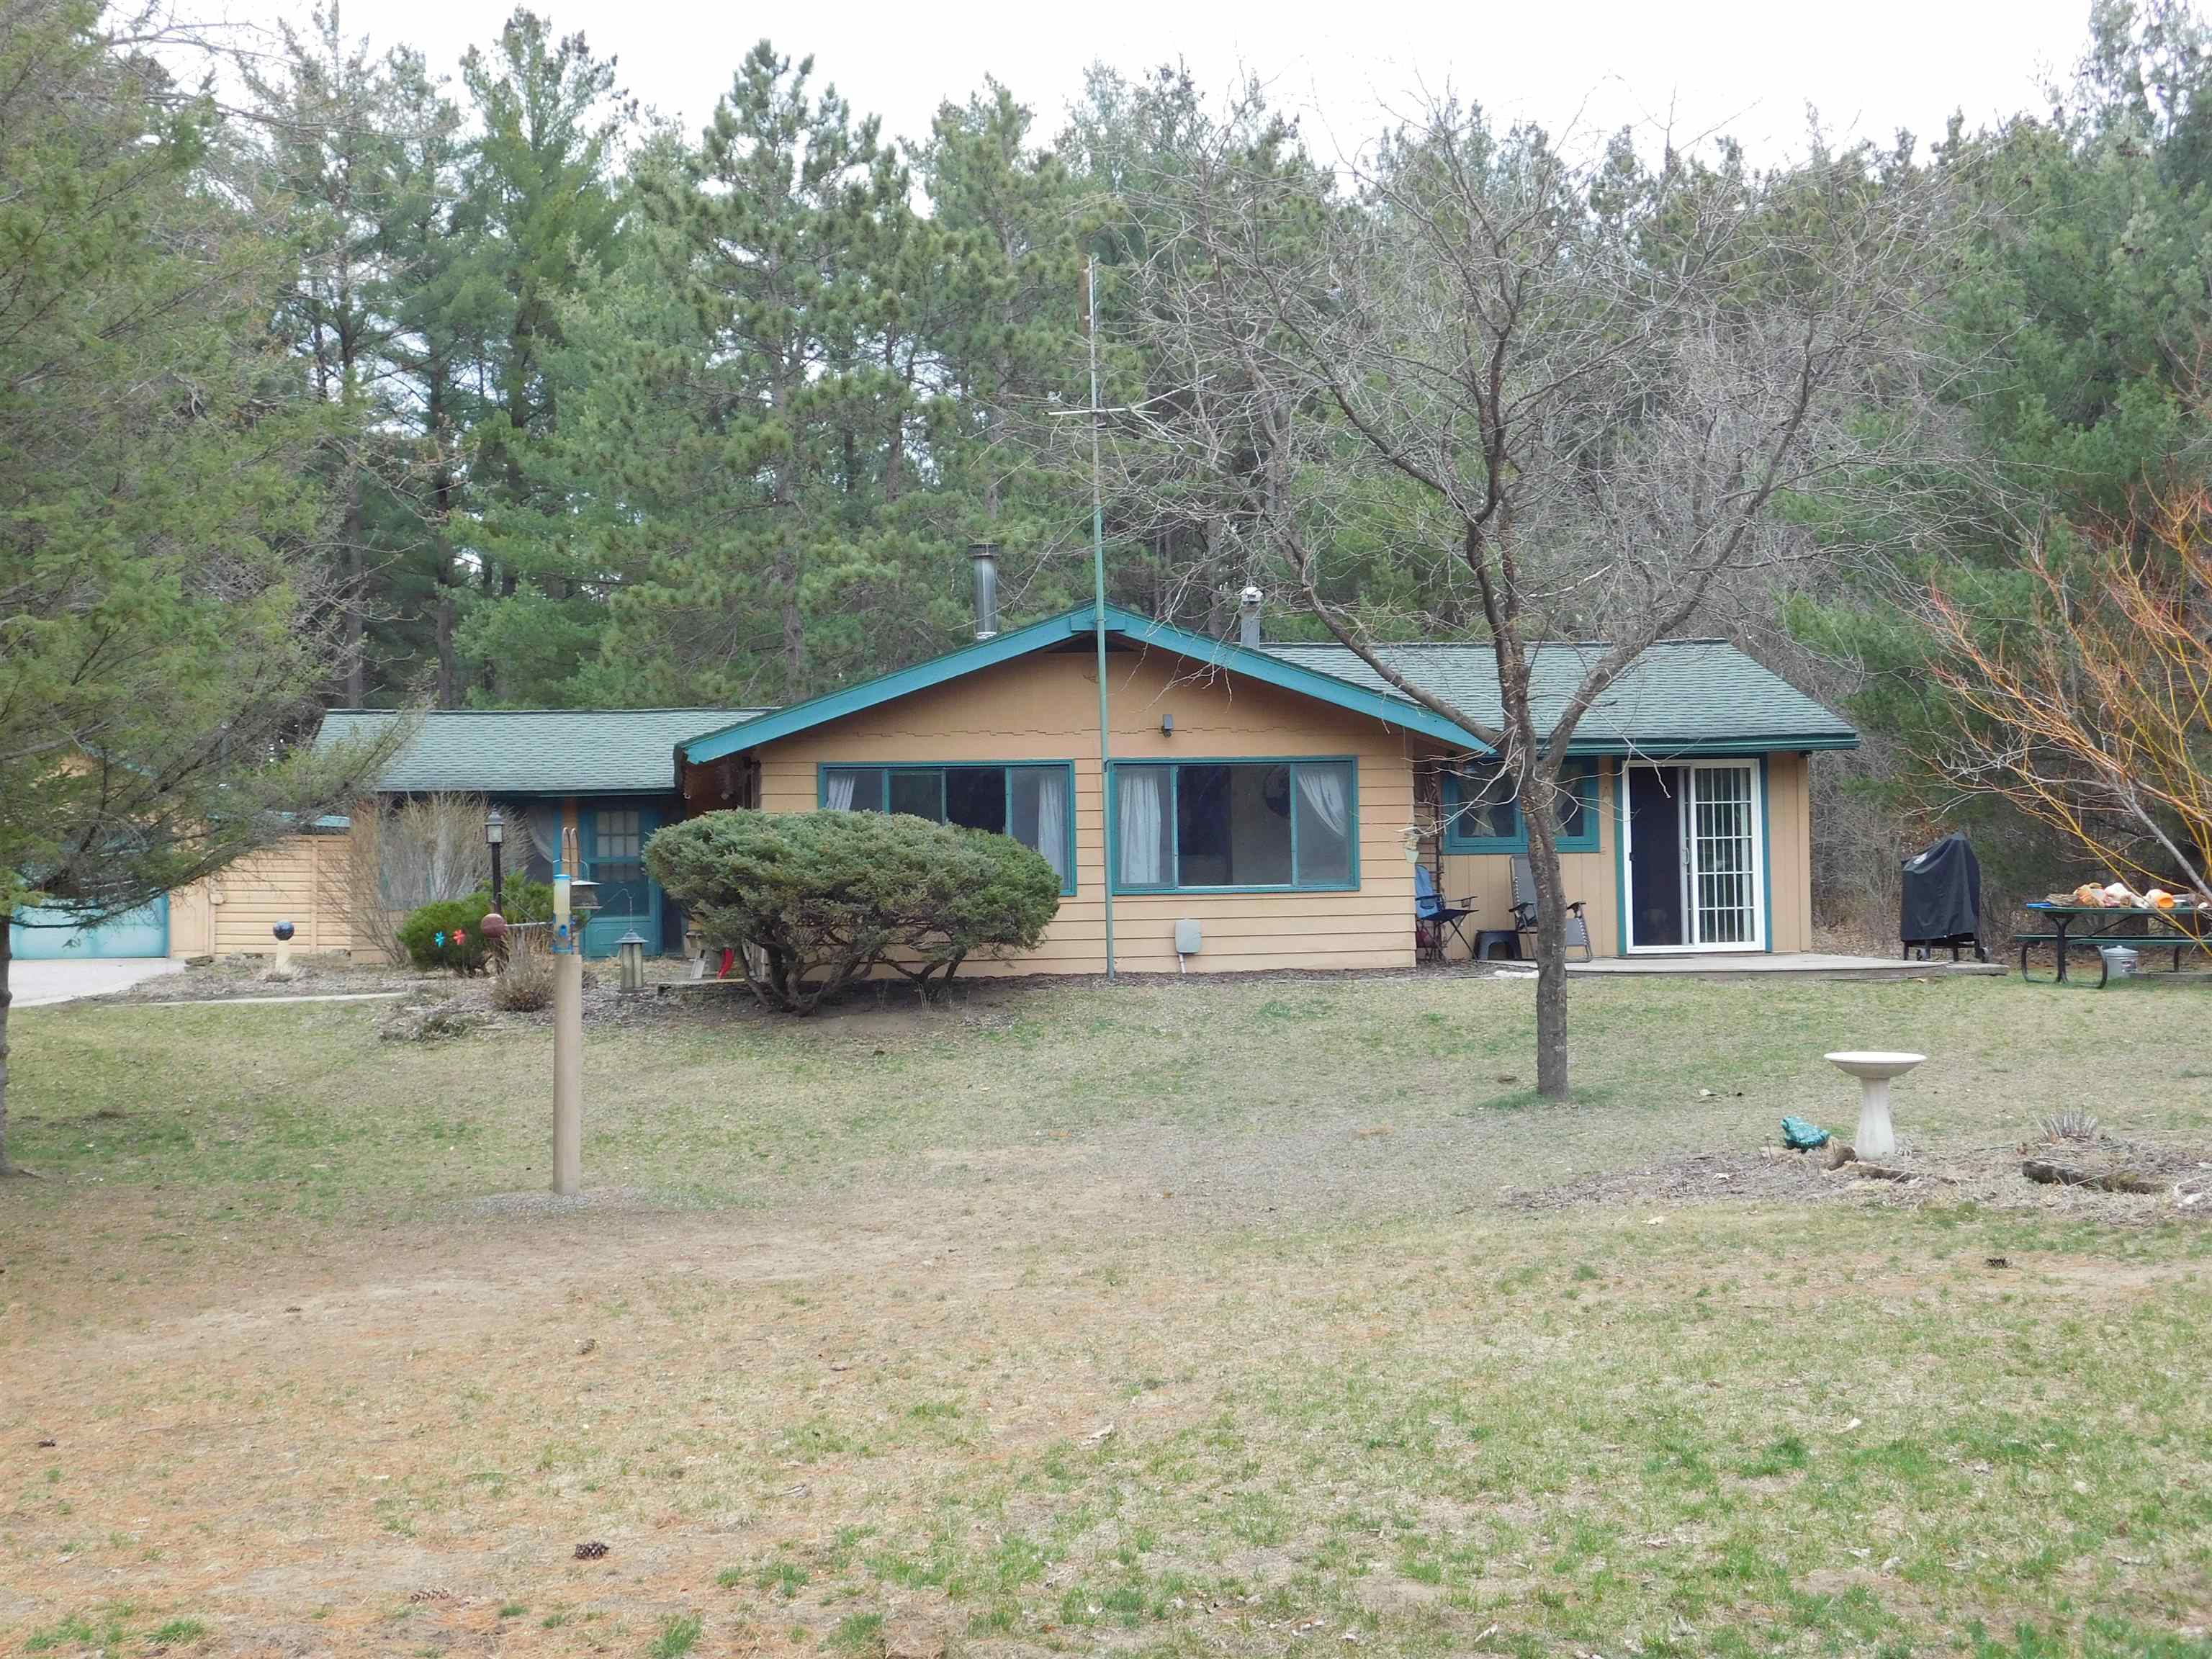 S12880 Porter Road, Spring Green, WI 53556